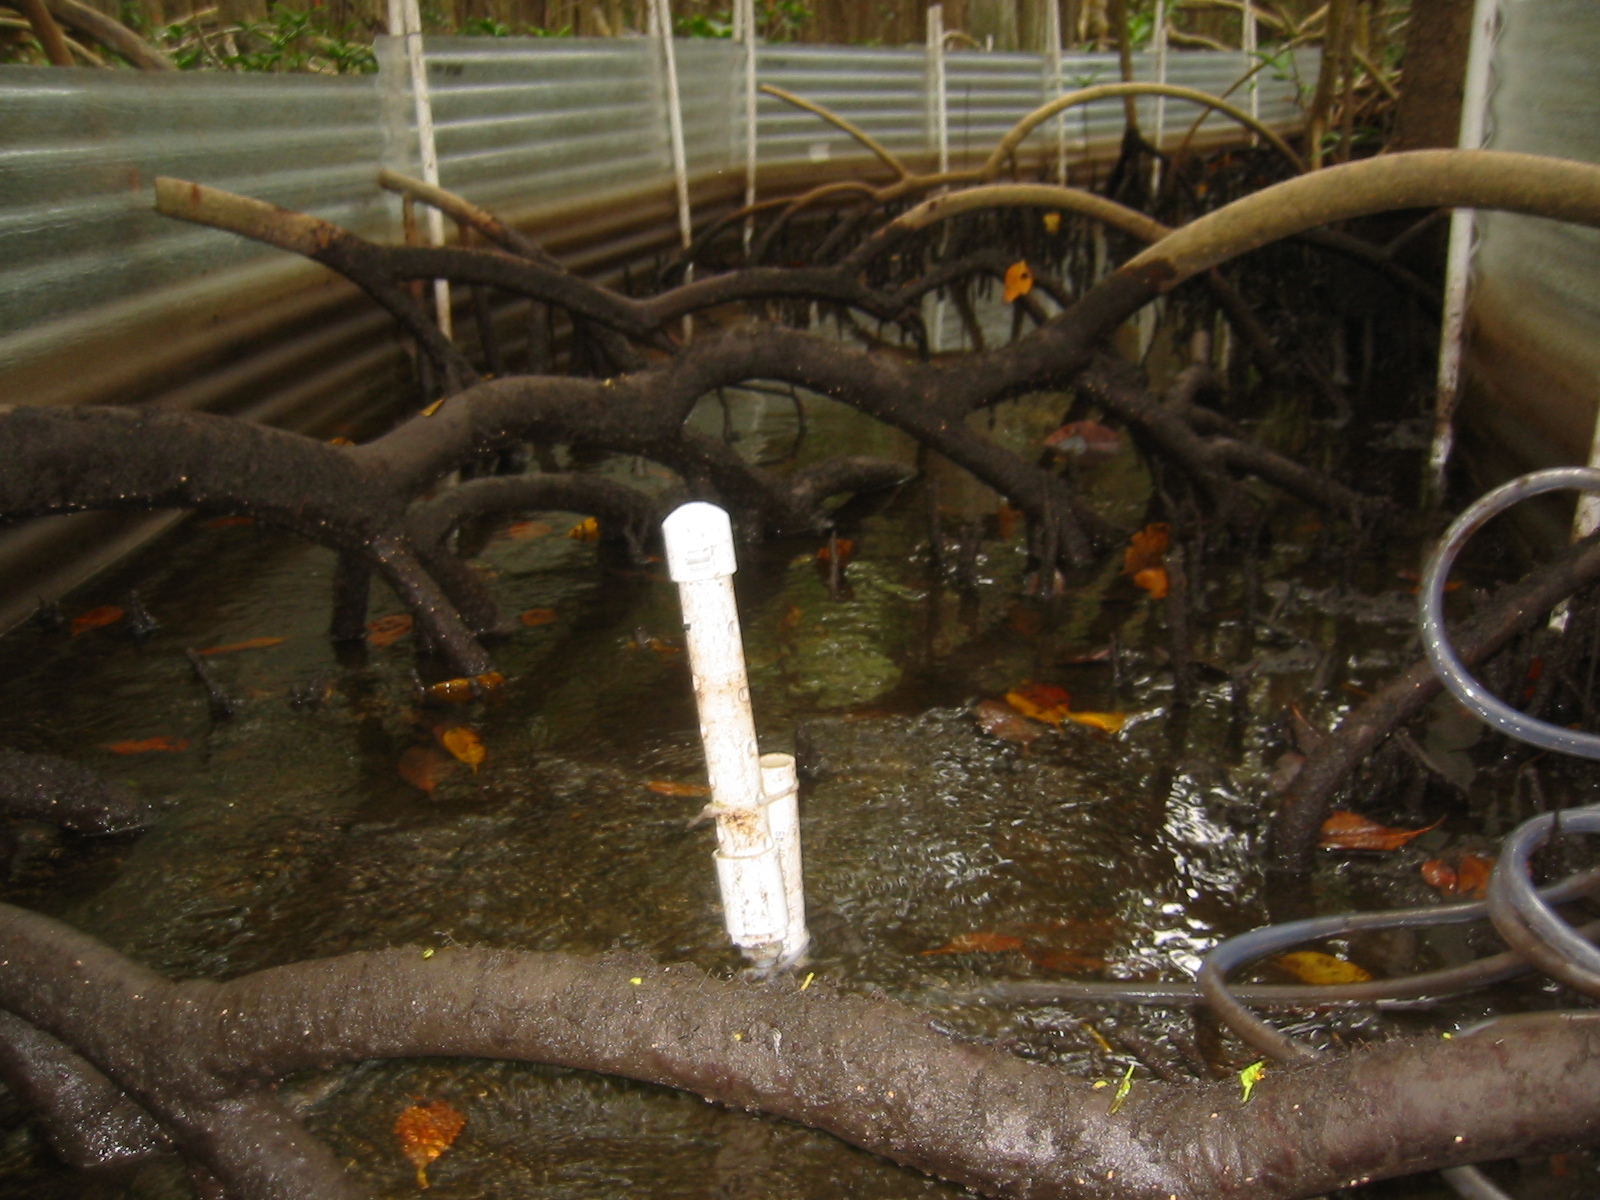 Water sheet flow inside a flume to measures nutrient/sediment fluxes in a mangrove forest at SRS-6